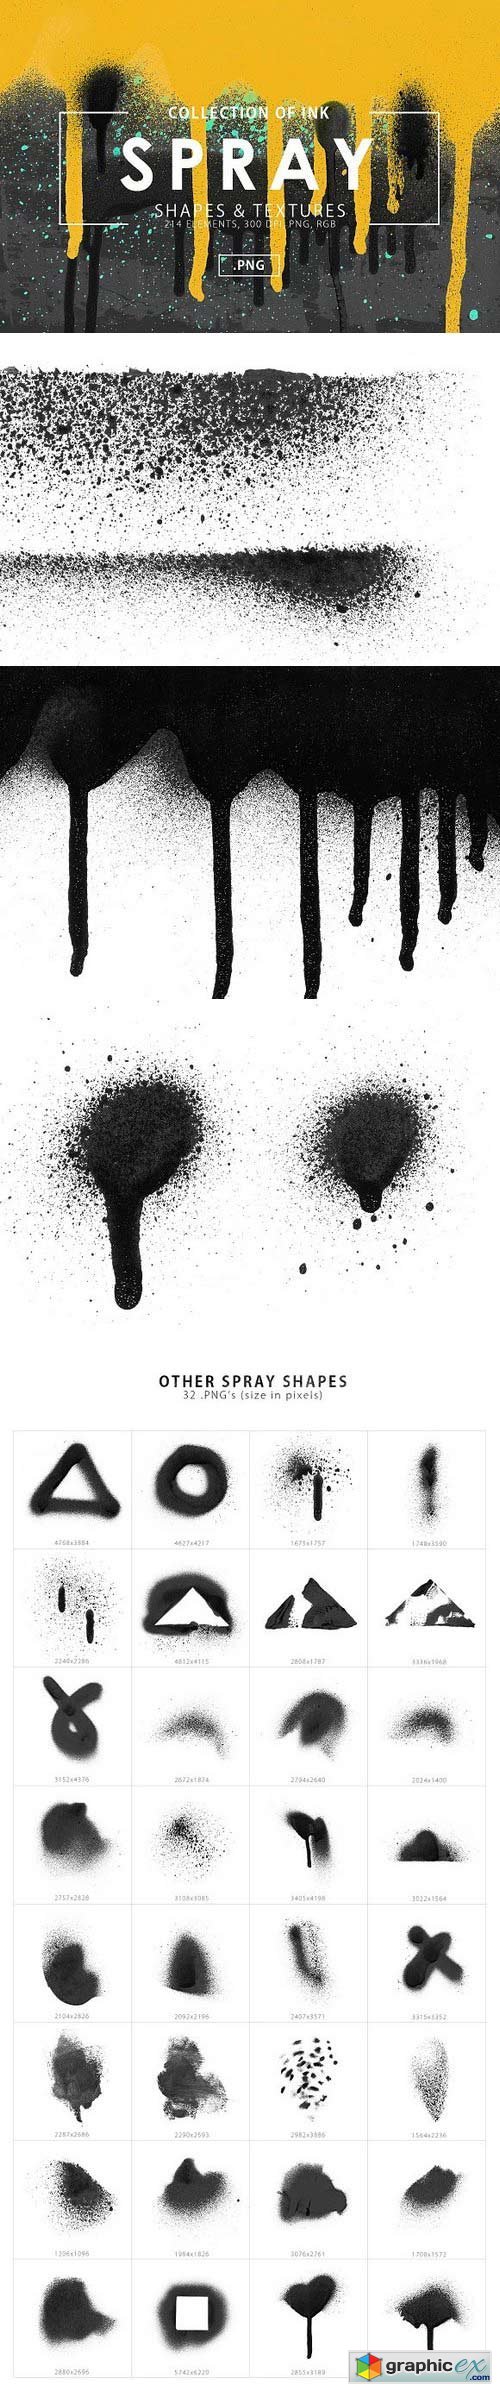 Spray Shapes & Textures